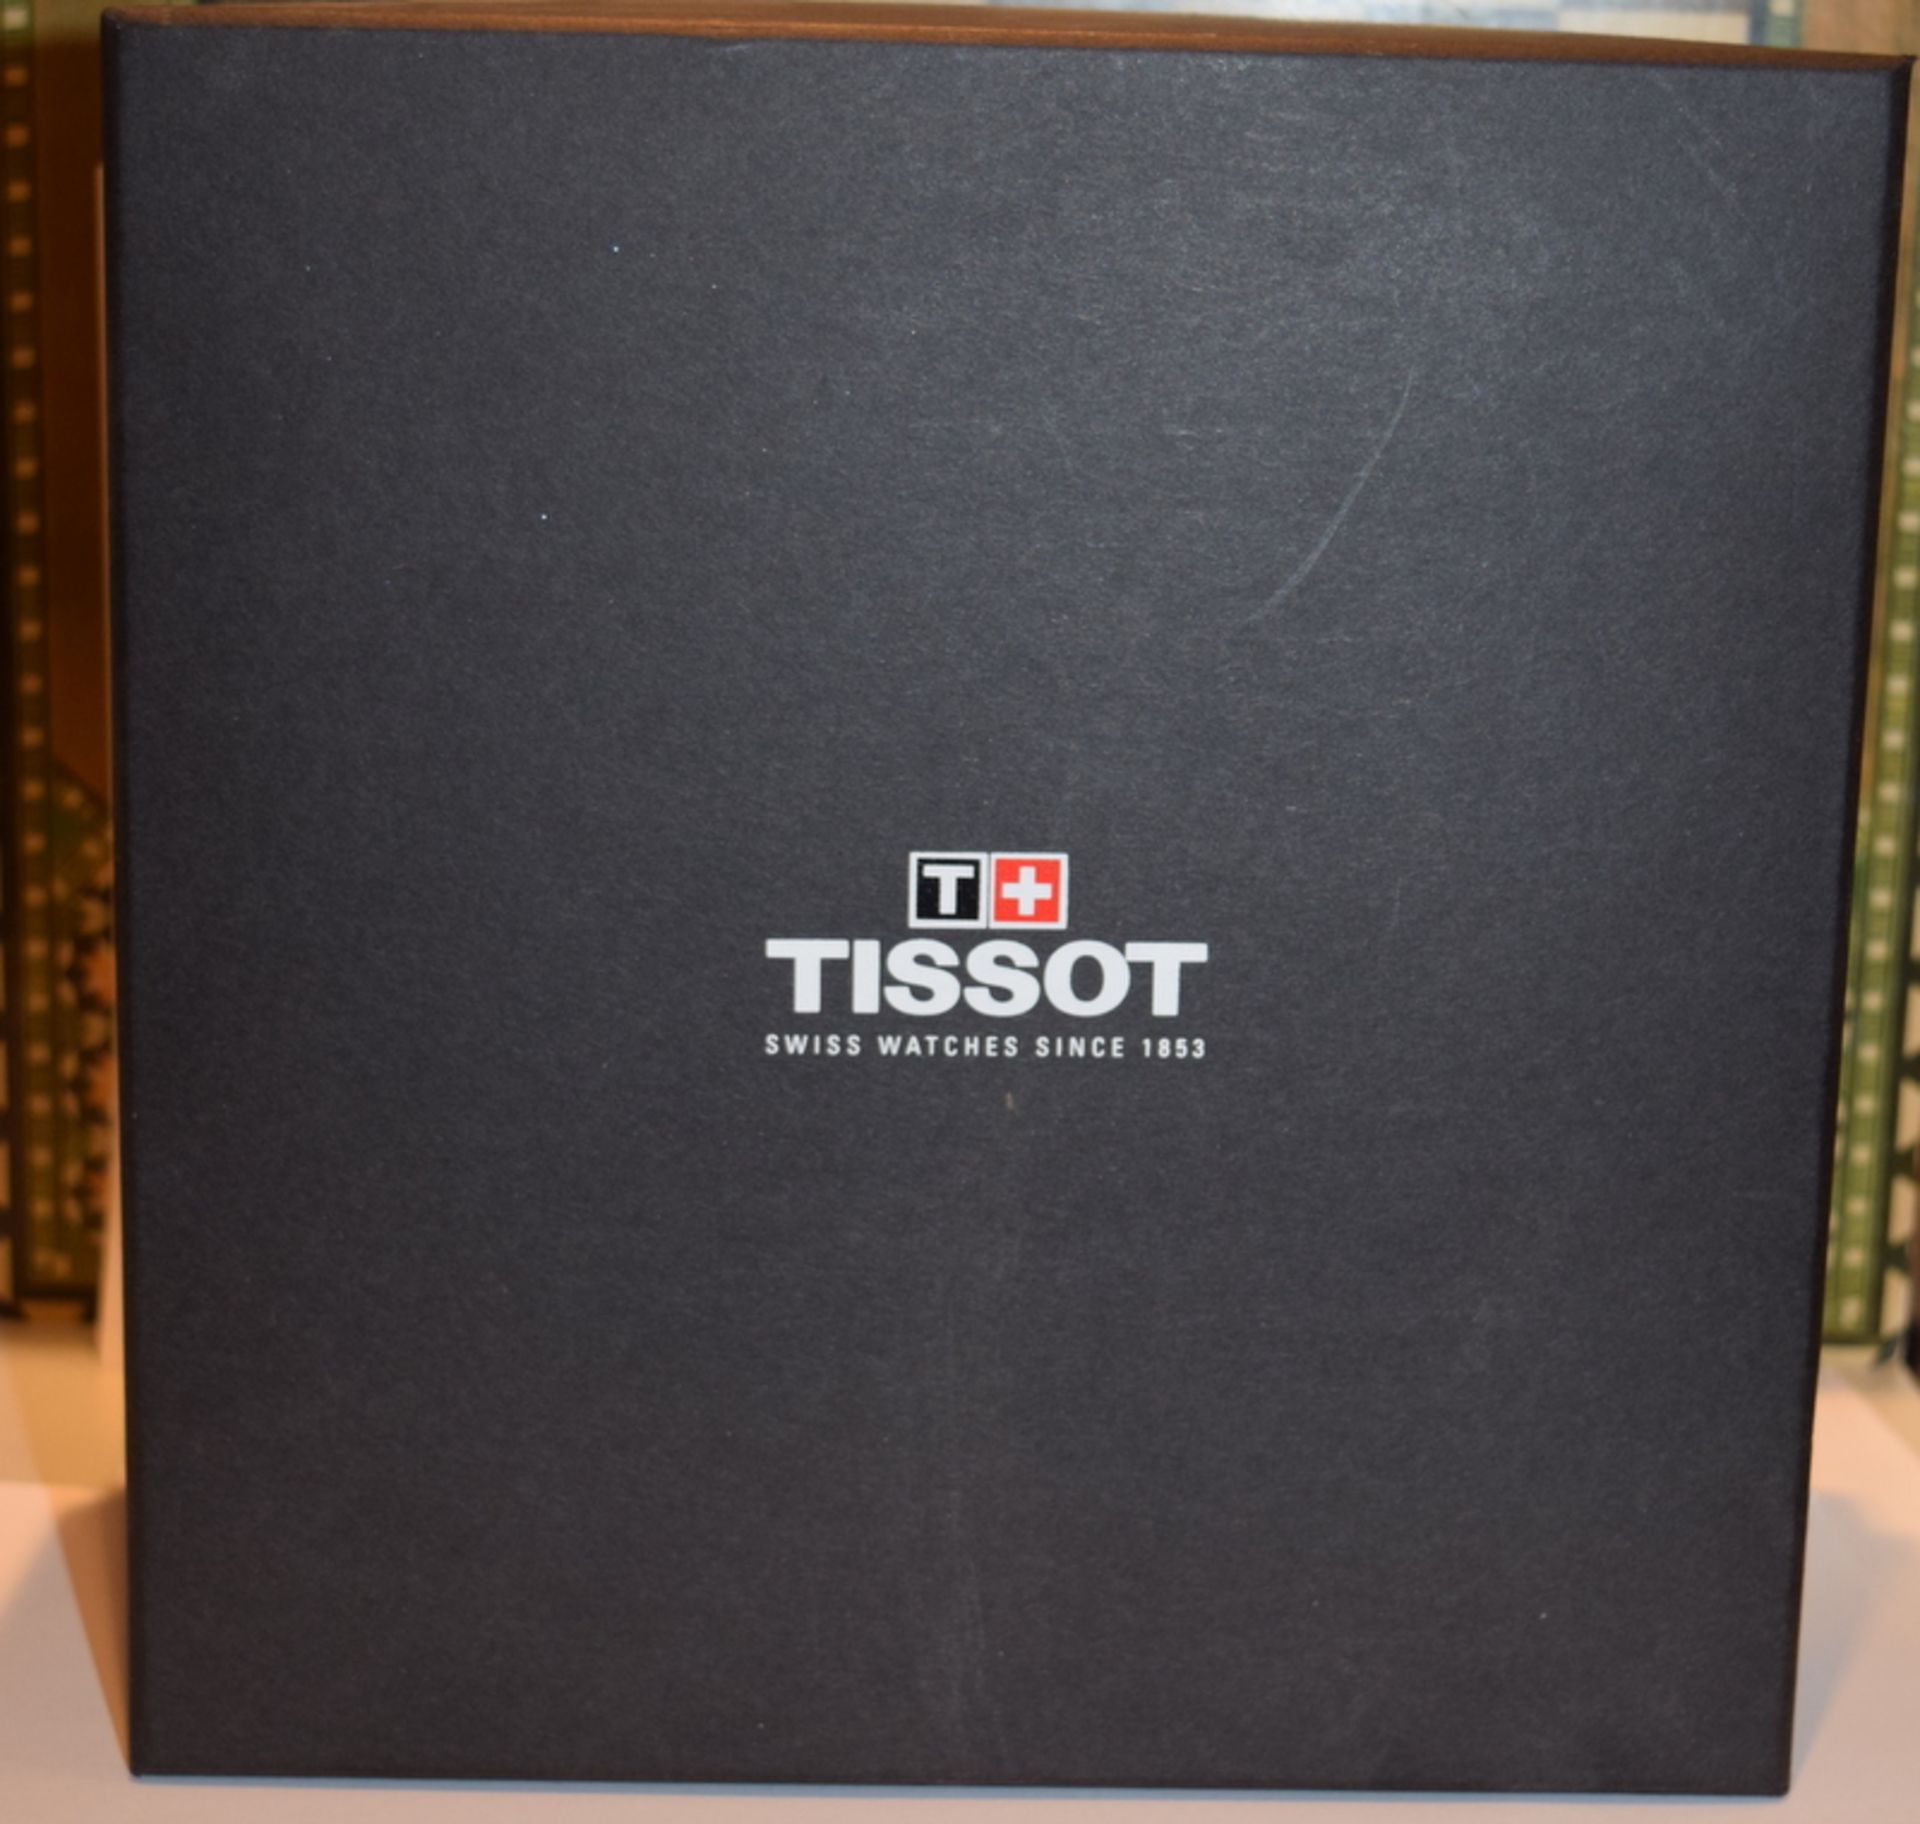 Tissot Limited Edition T-Race MOTO GP Watch - Image 3 of 7